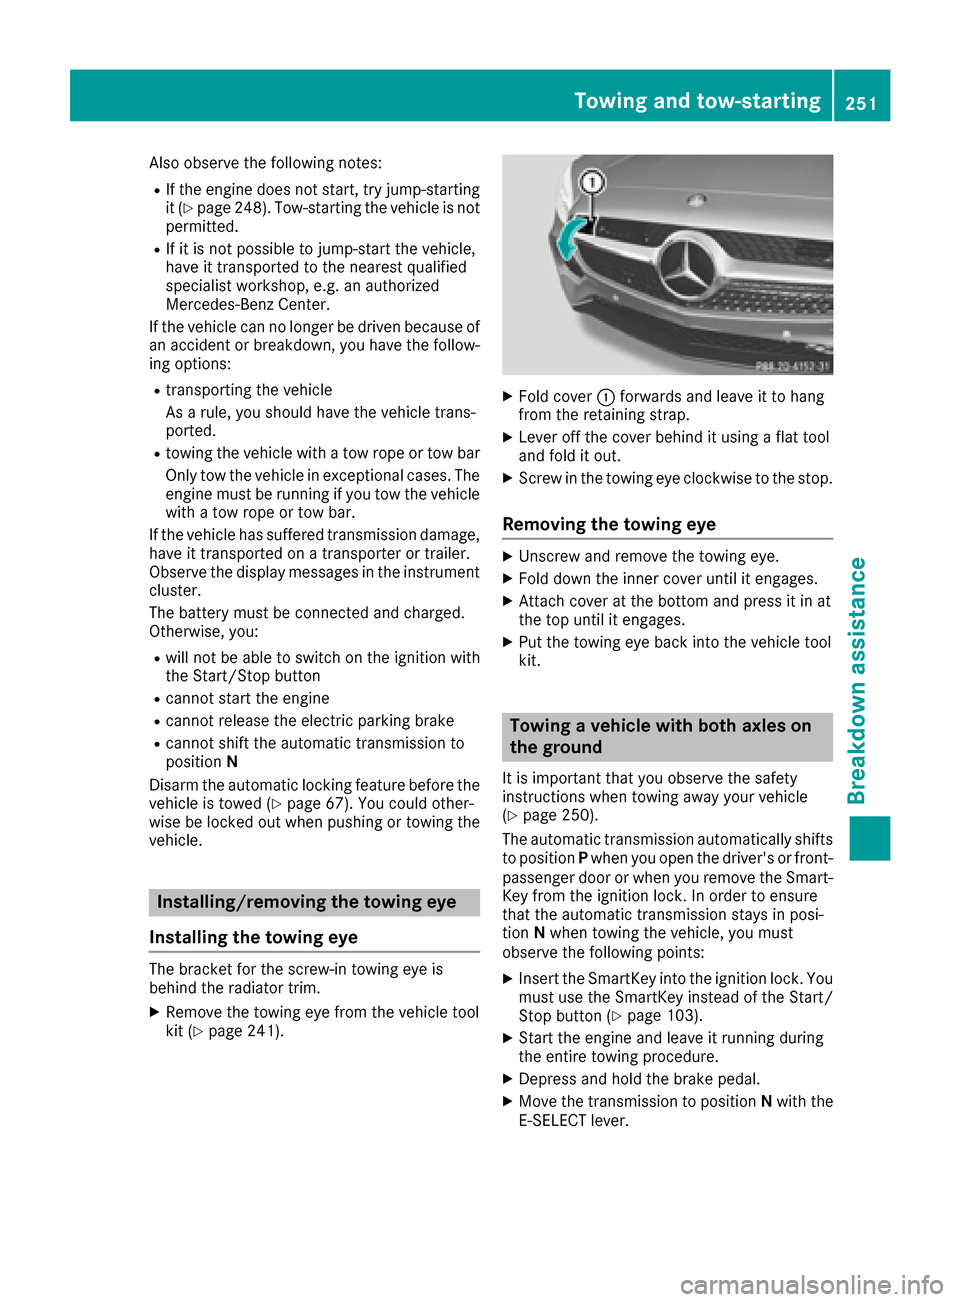 MERCEDES-BENZ AMG GT S 2017 C190 Owners Manual Also observe the following notes:
RIf the engine does not start, try jump-starting
it (Ypage 248). Tow-starting the vehicle is not
permitted.
RIf it is not possible to jump-start the vehicle,
have it 